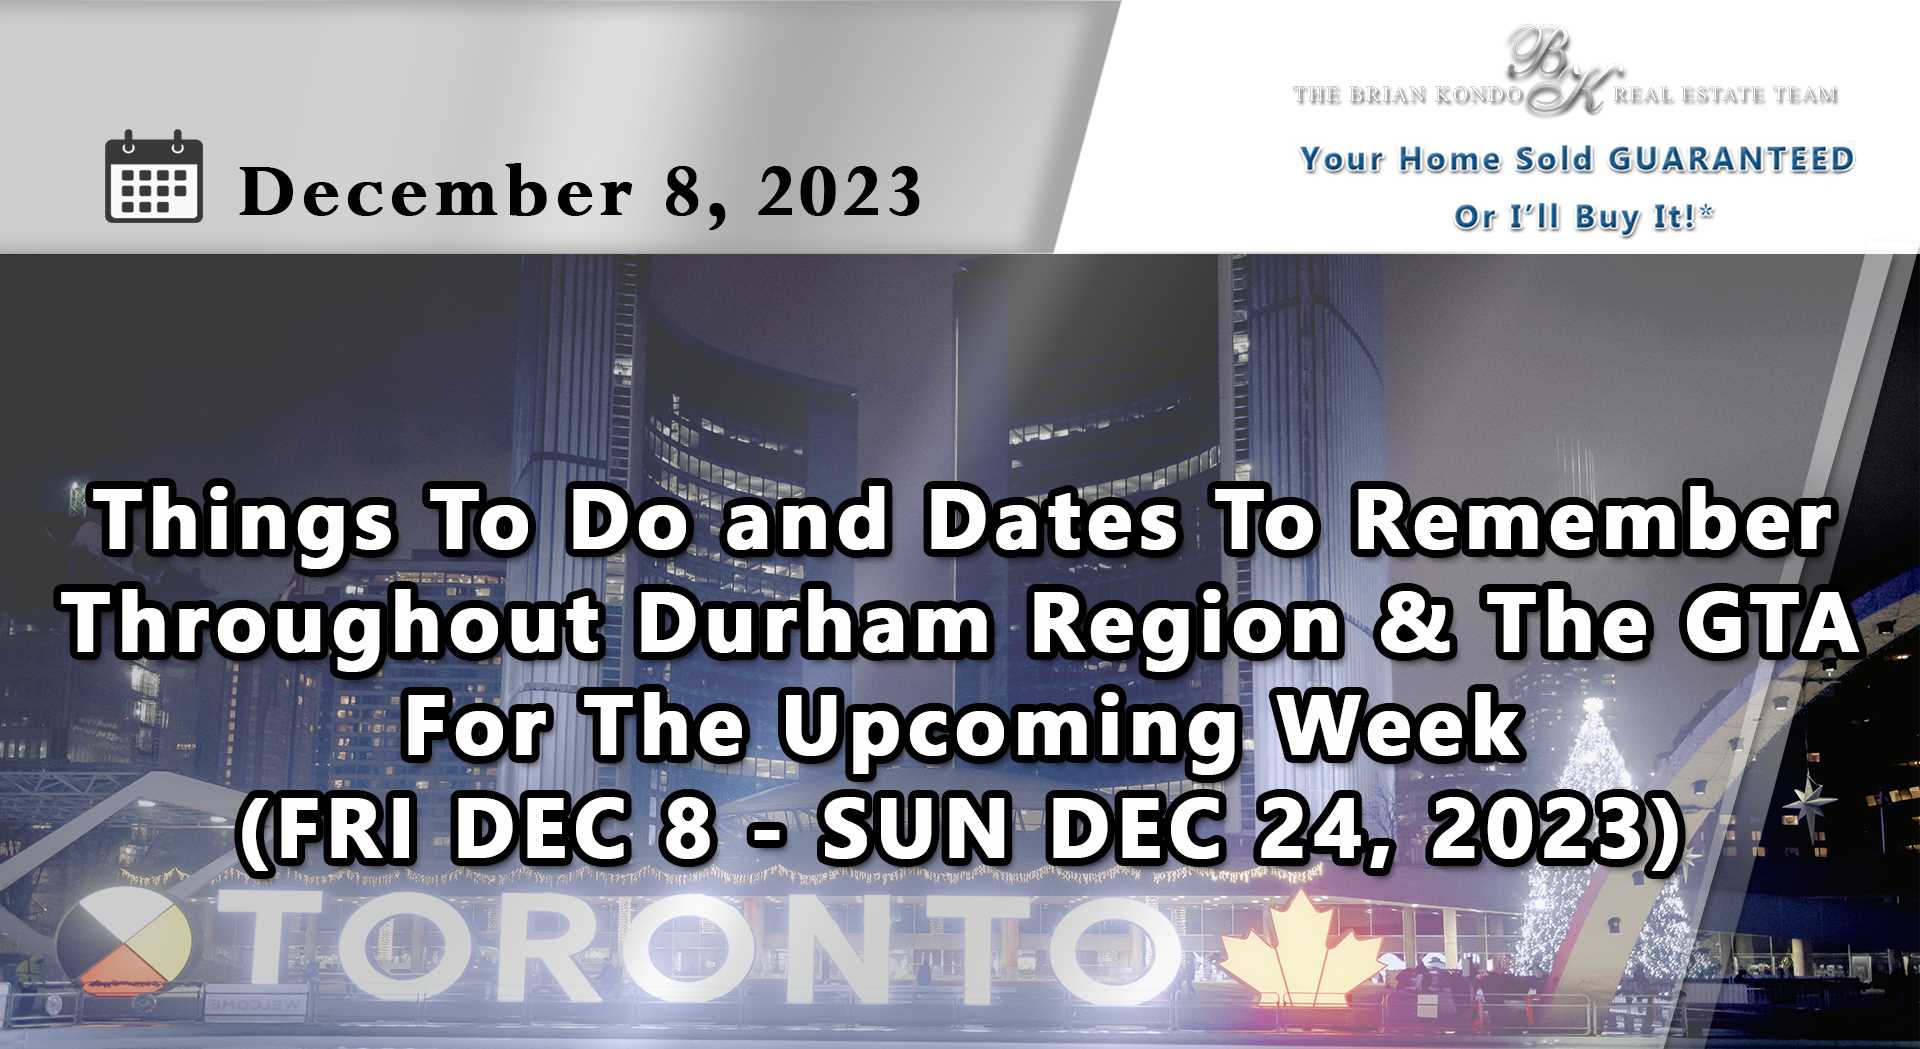 Things To Do and Dates To Remember Throughout Durham Region and The GTA For The Upcoming Week (FRI DEC 8 - FRI DEC 15, 2023)